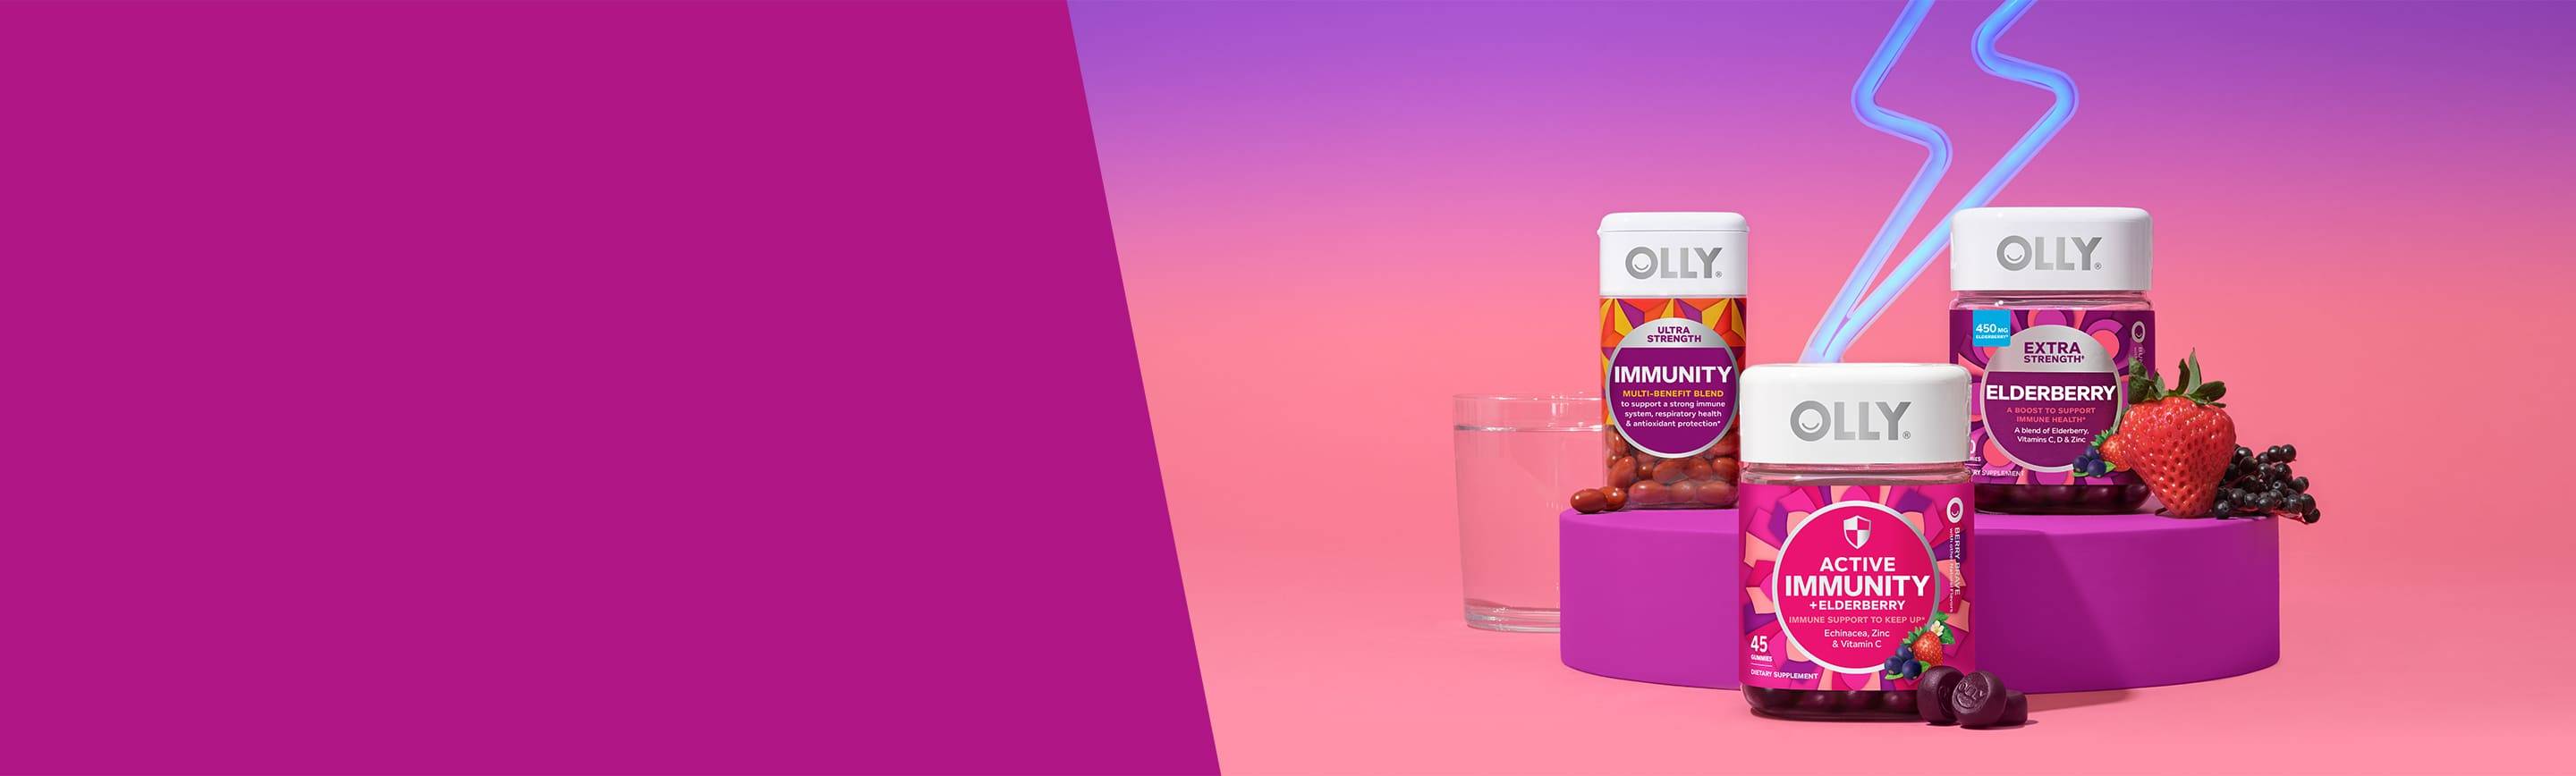 OLLY Immunity Products